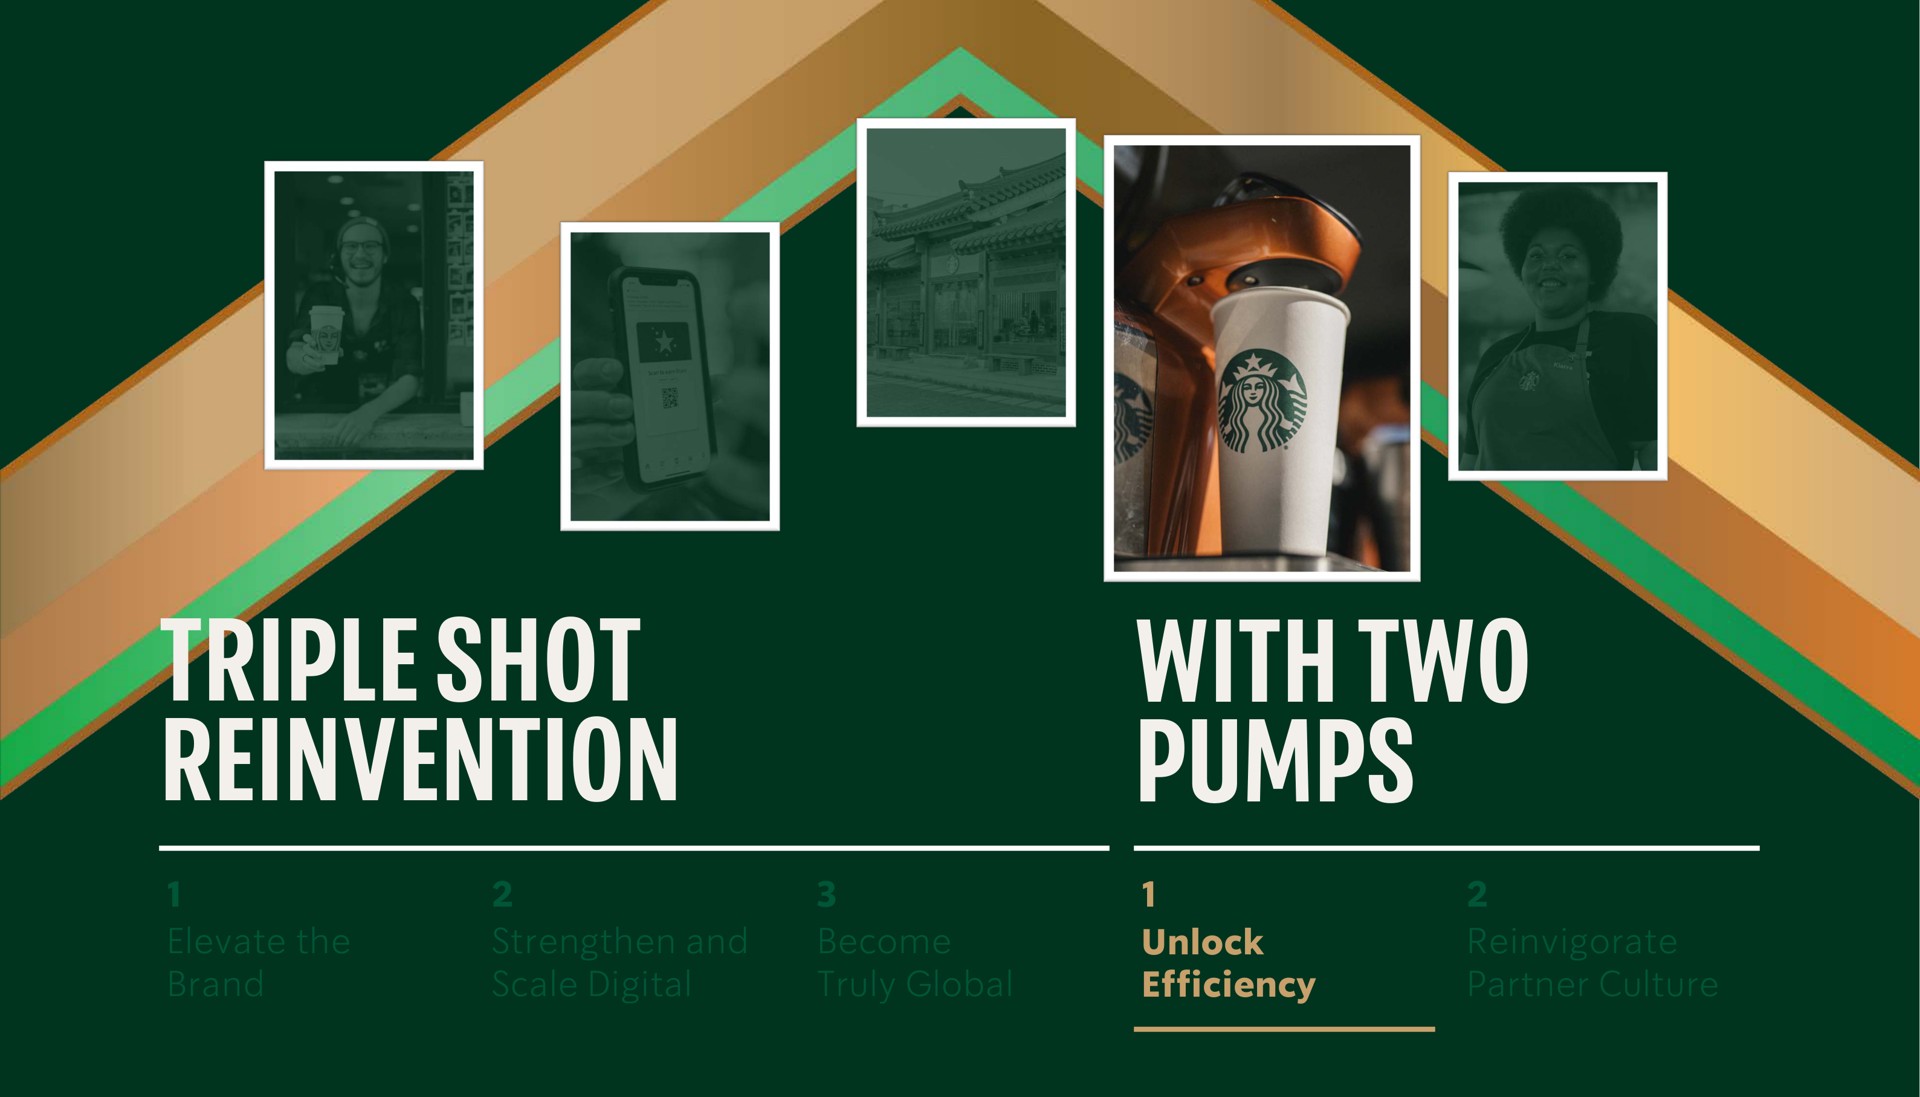 triple shot reinvention with two pumps us | Starbucks